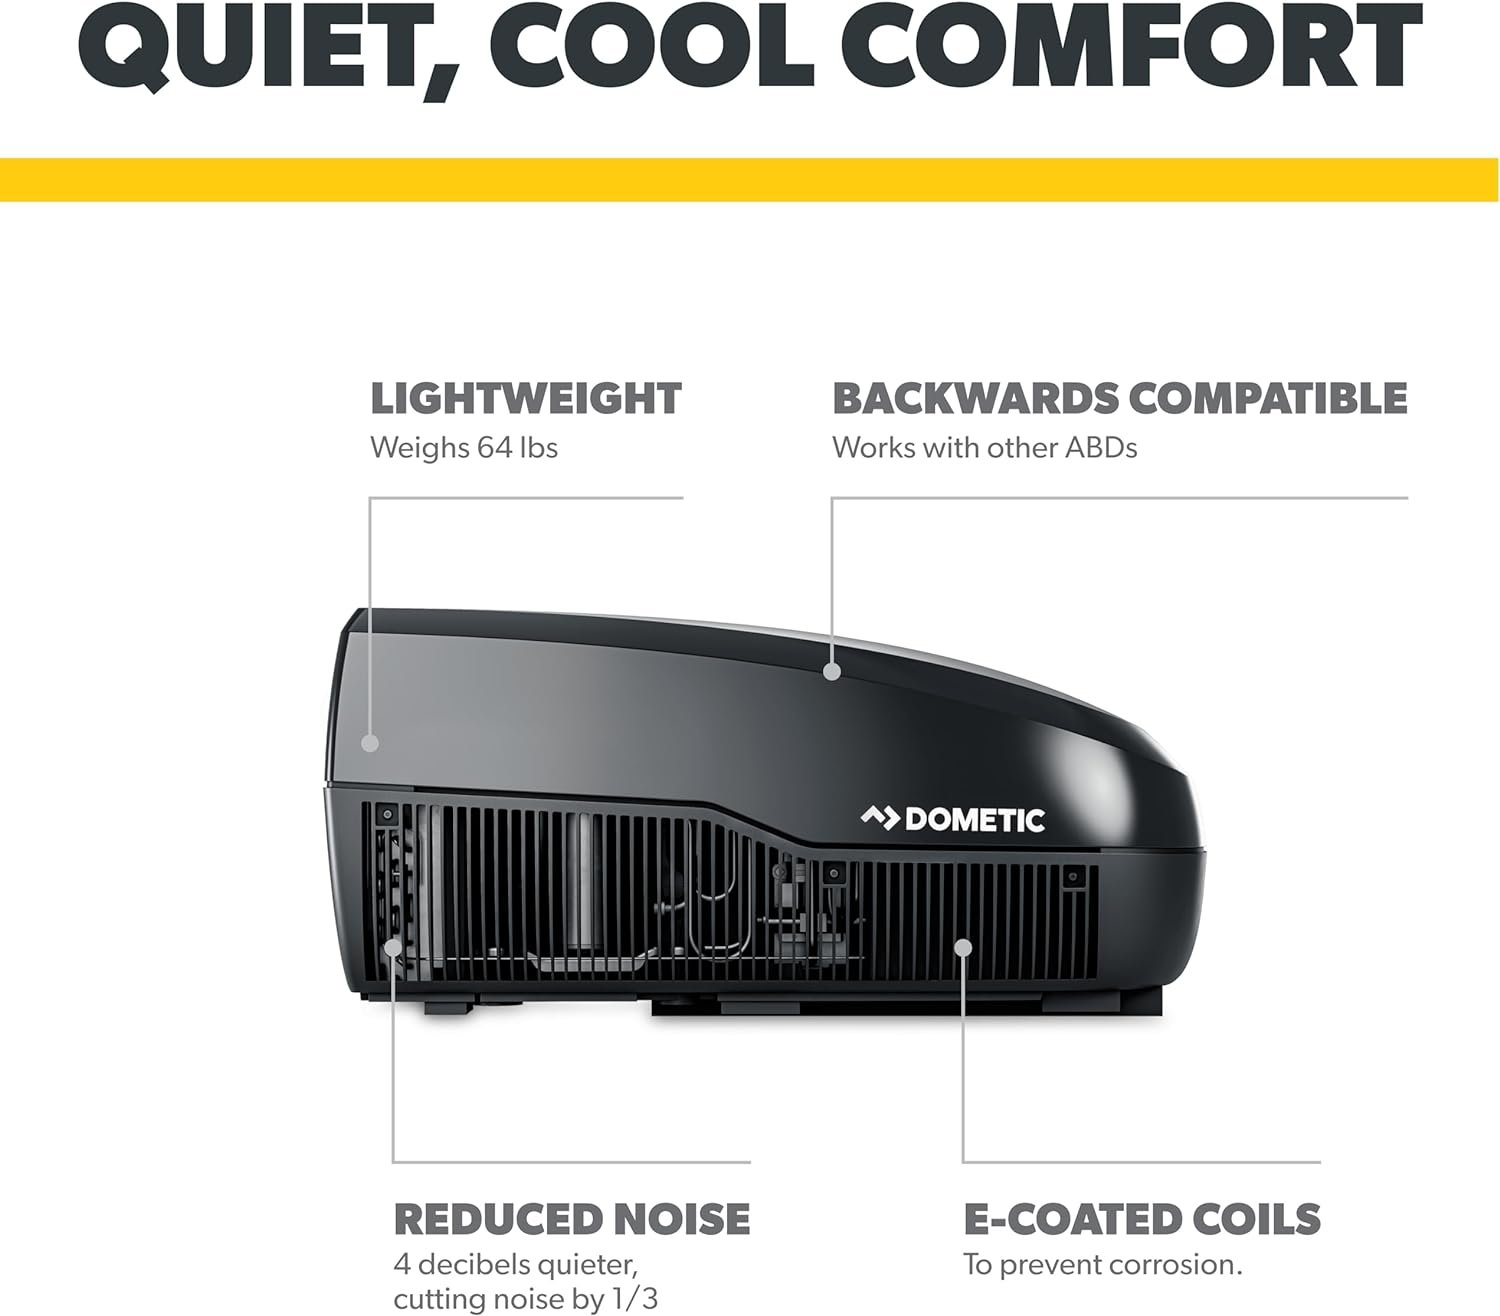 Dometic 15,000 BTU Air Conditioner Review